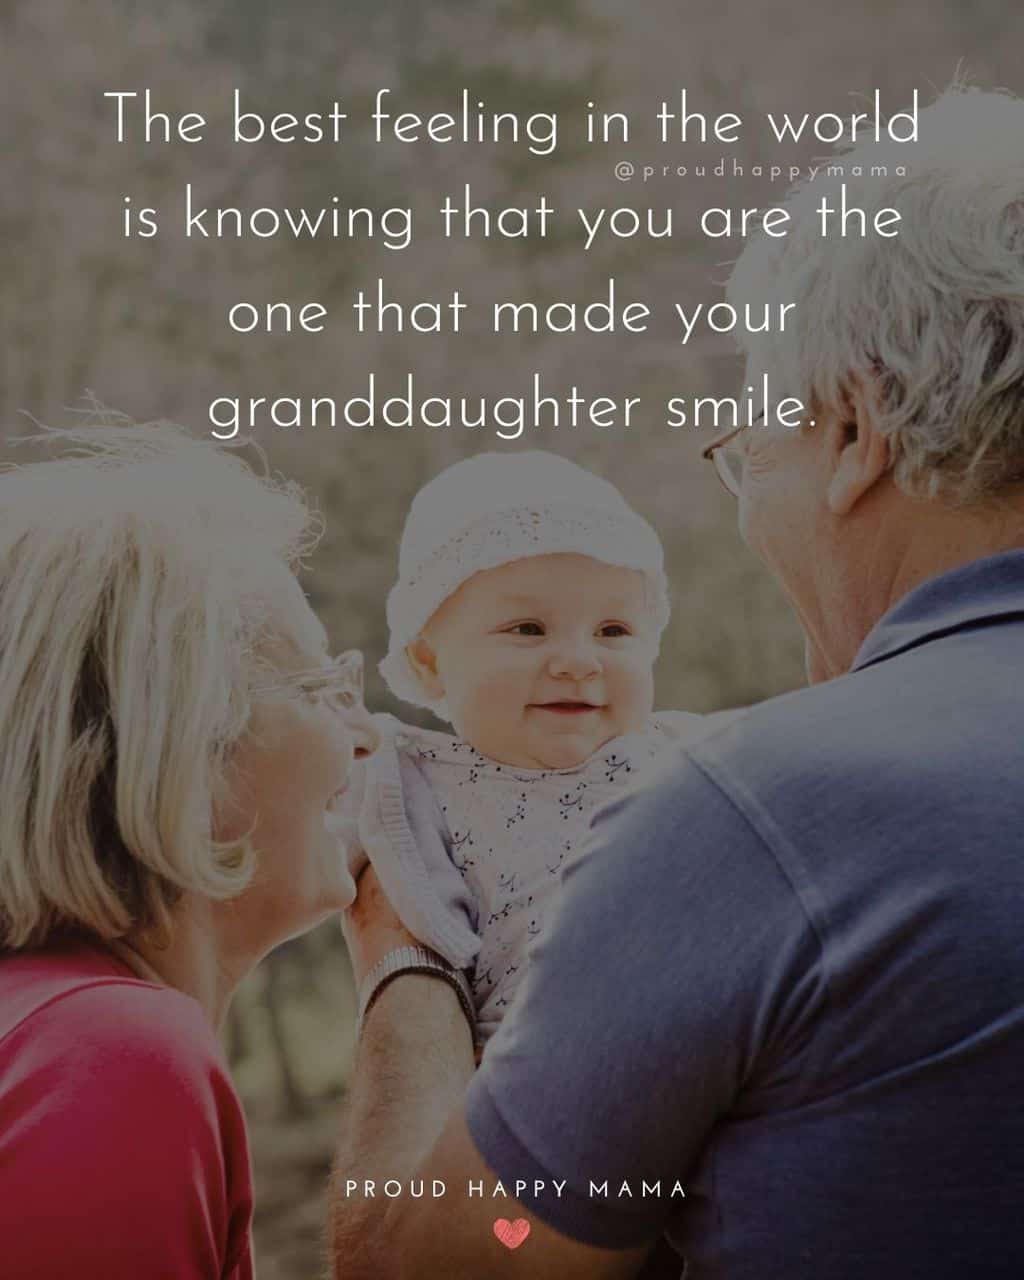 Granddaughter Quotes - The best feeling in the world is knowing that you are the one that made your granddaughter smile.